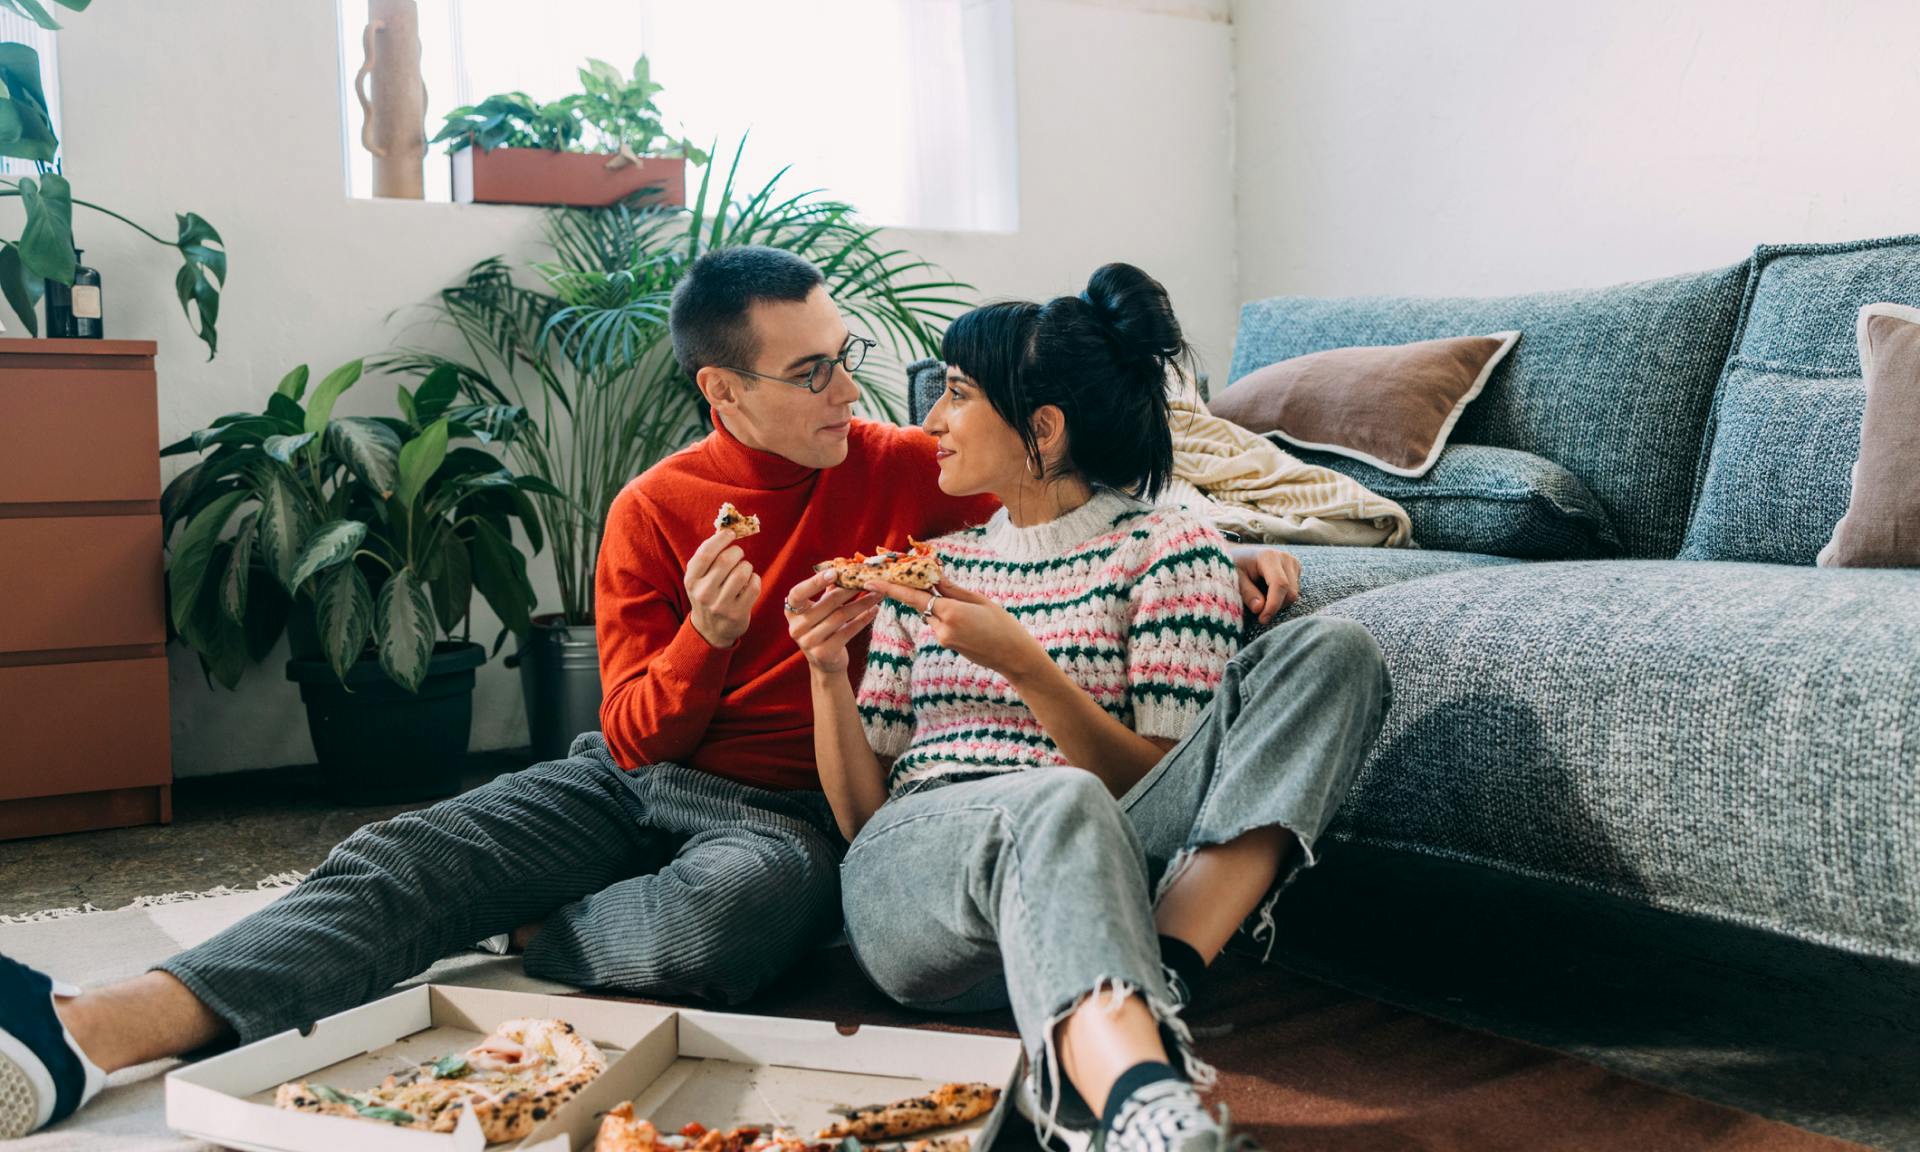 couple eating pizza together in living room